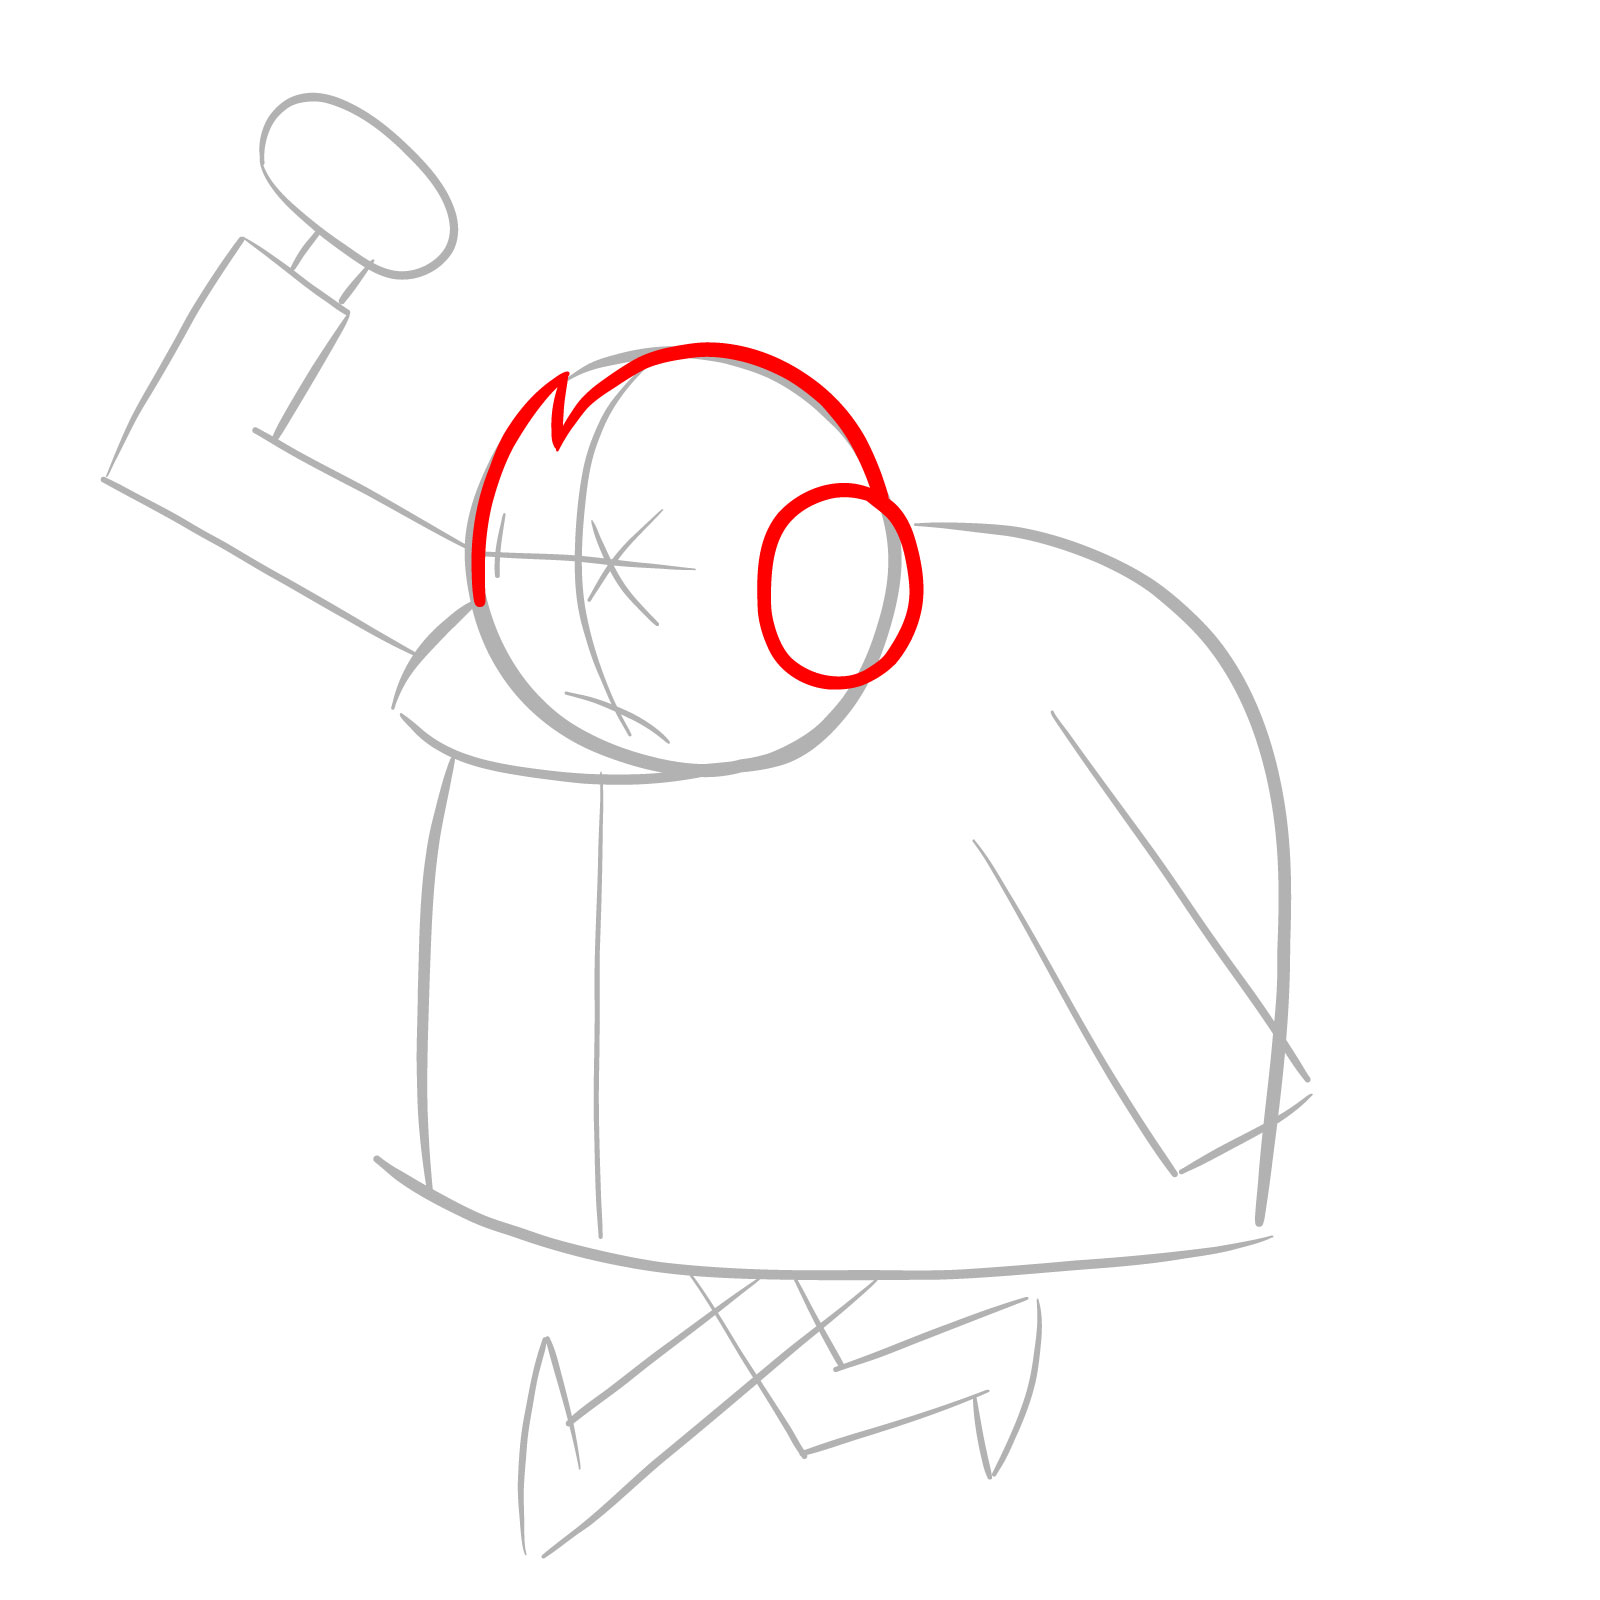 How to draw Lord Boxman from OK K.O.! - step 04